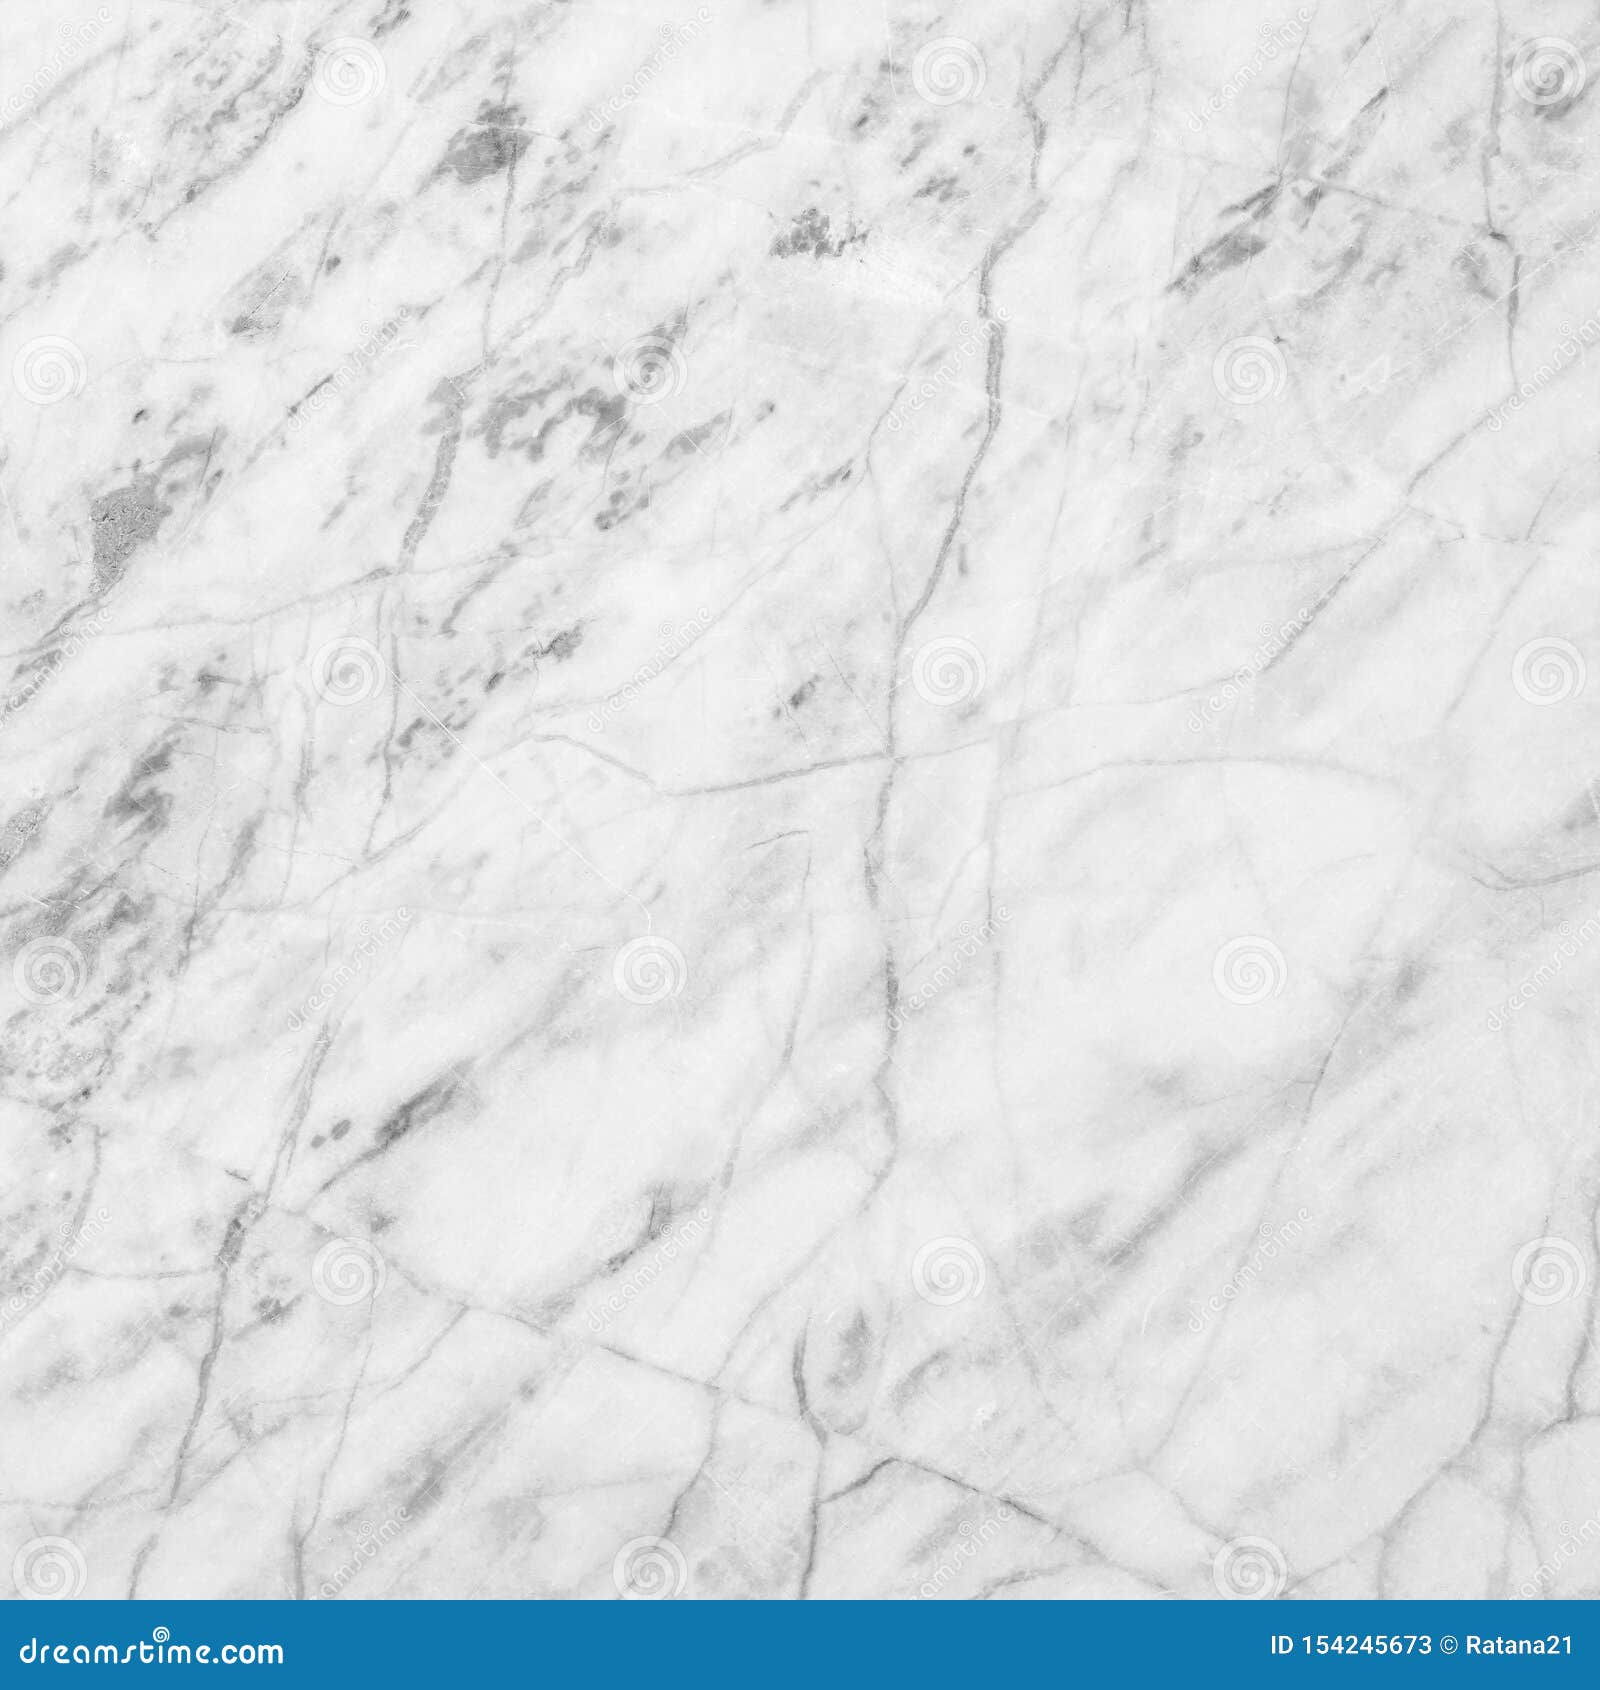 White Marble Texture Nature Abstract Background Stock Image Image Of